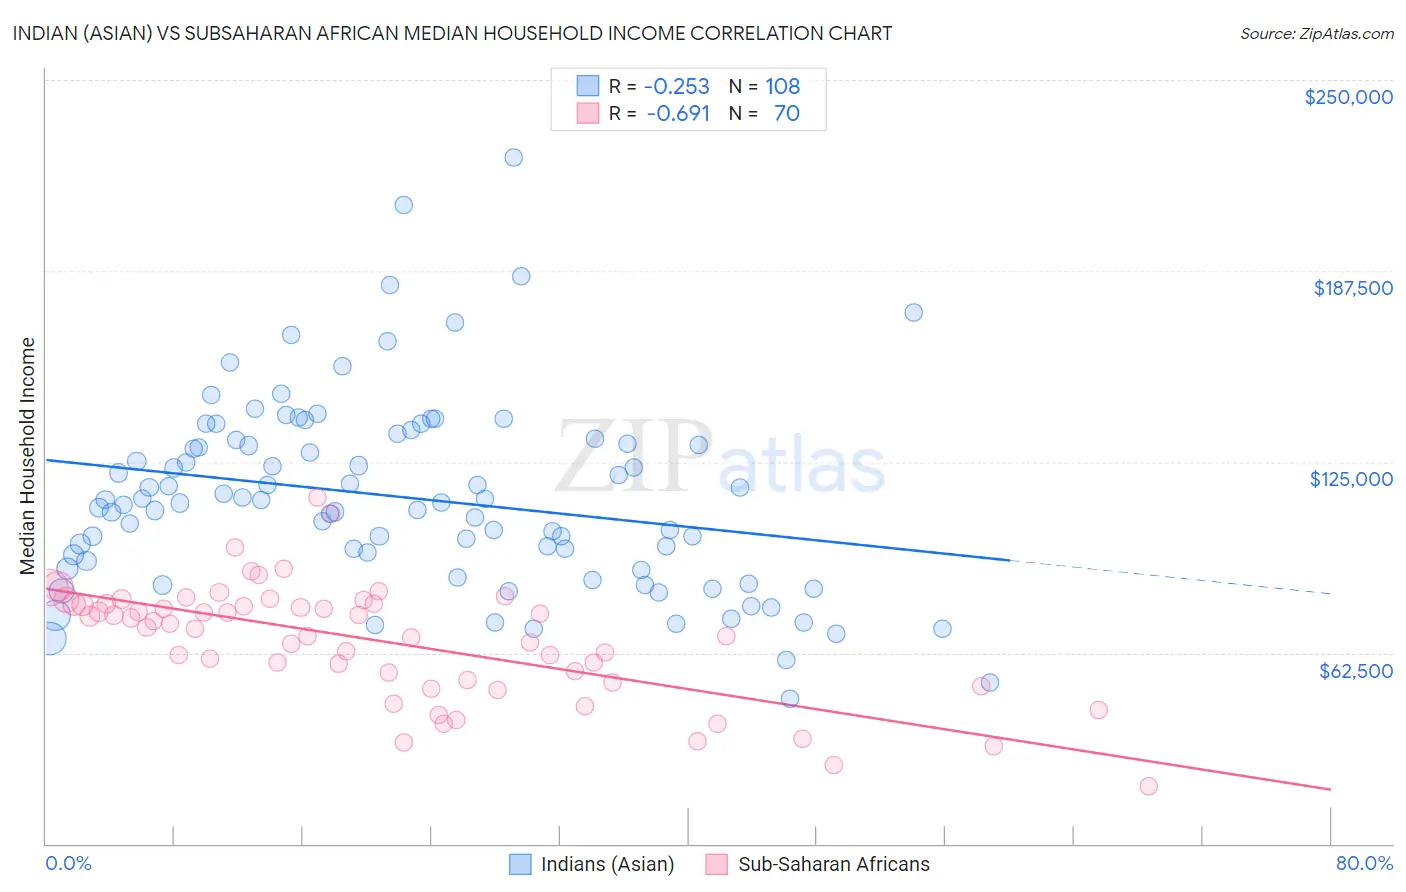 Indian (Asian) vs Subsaharan African Median Household Income